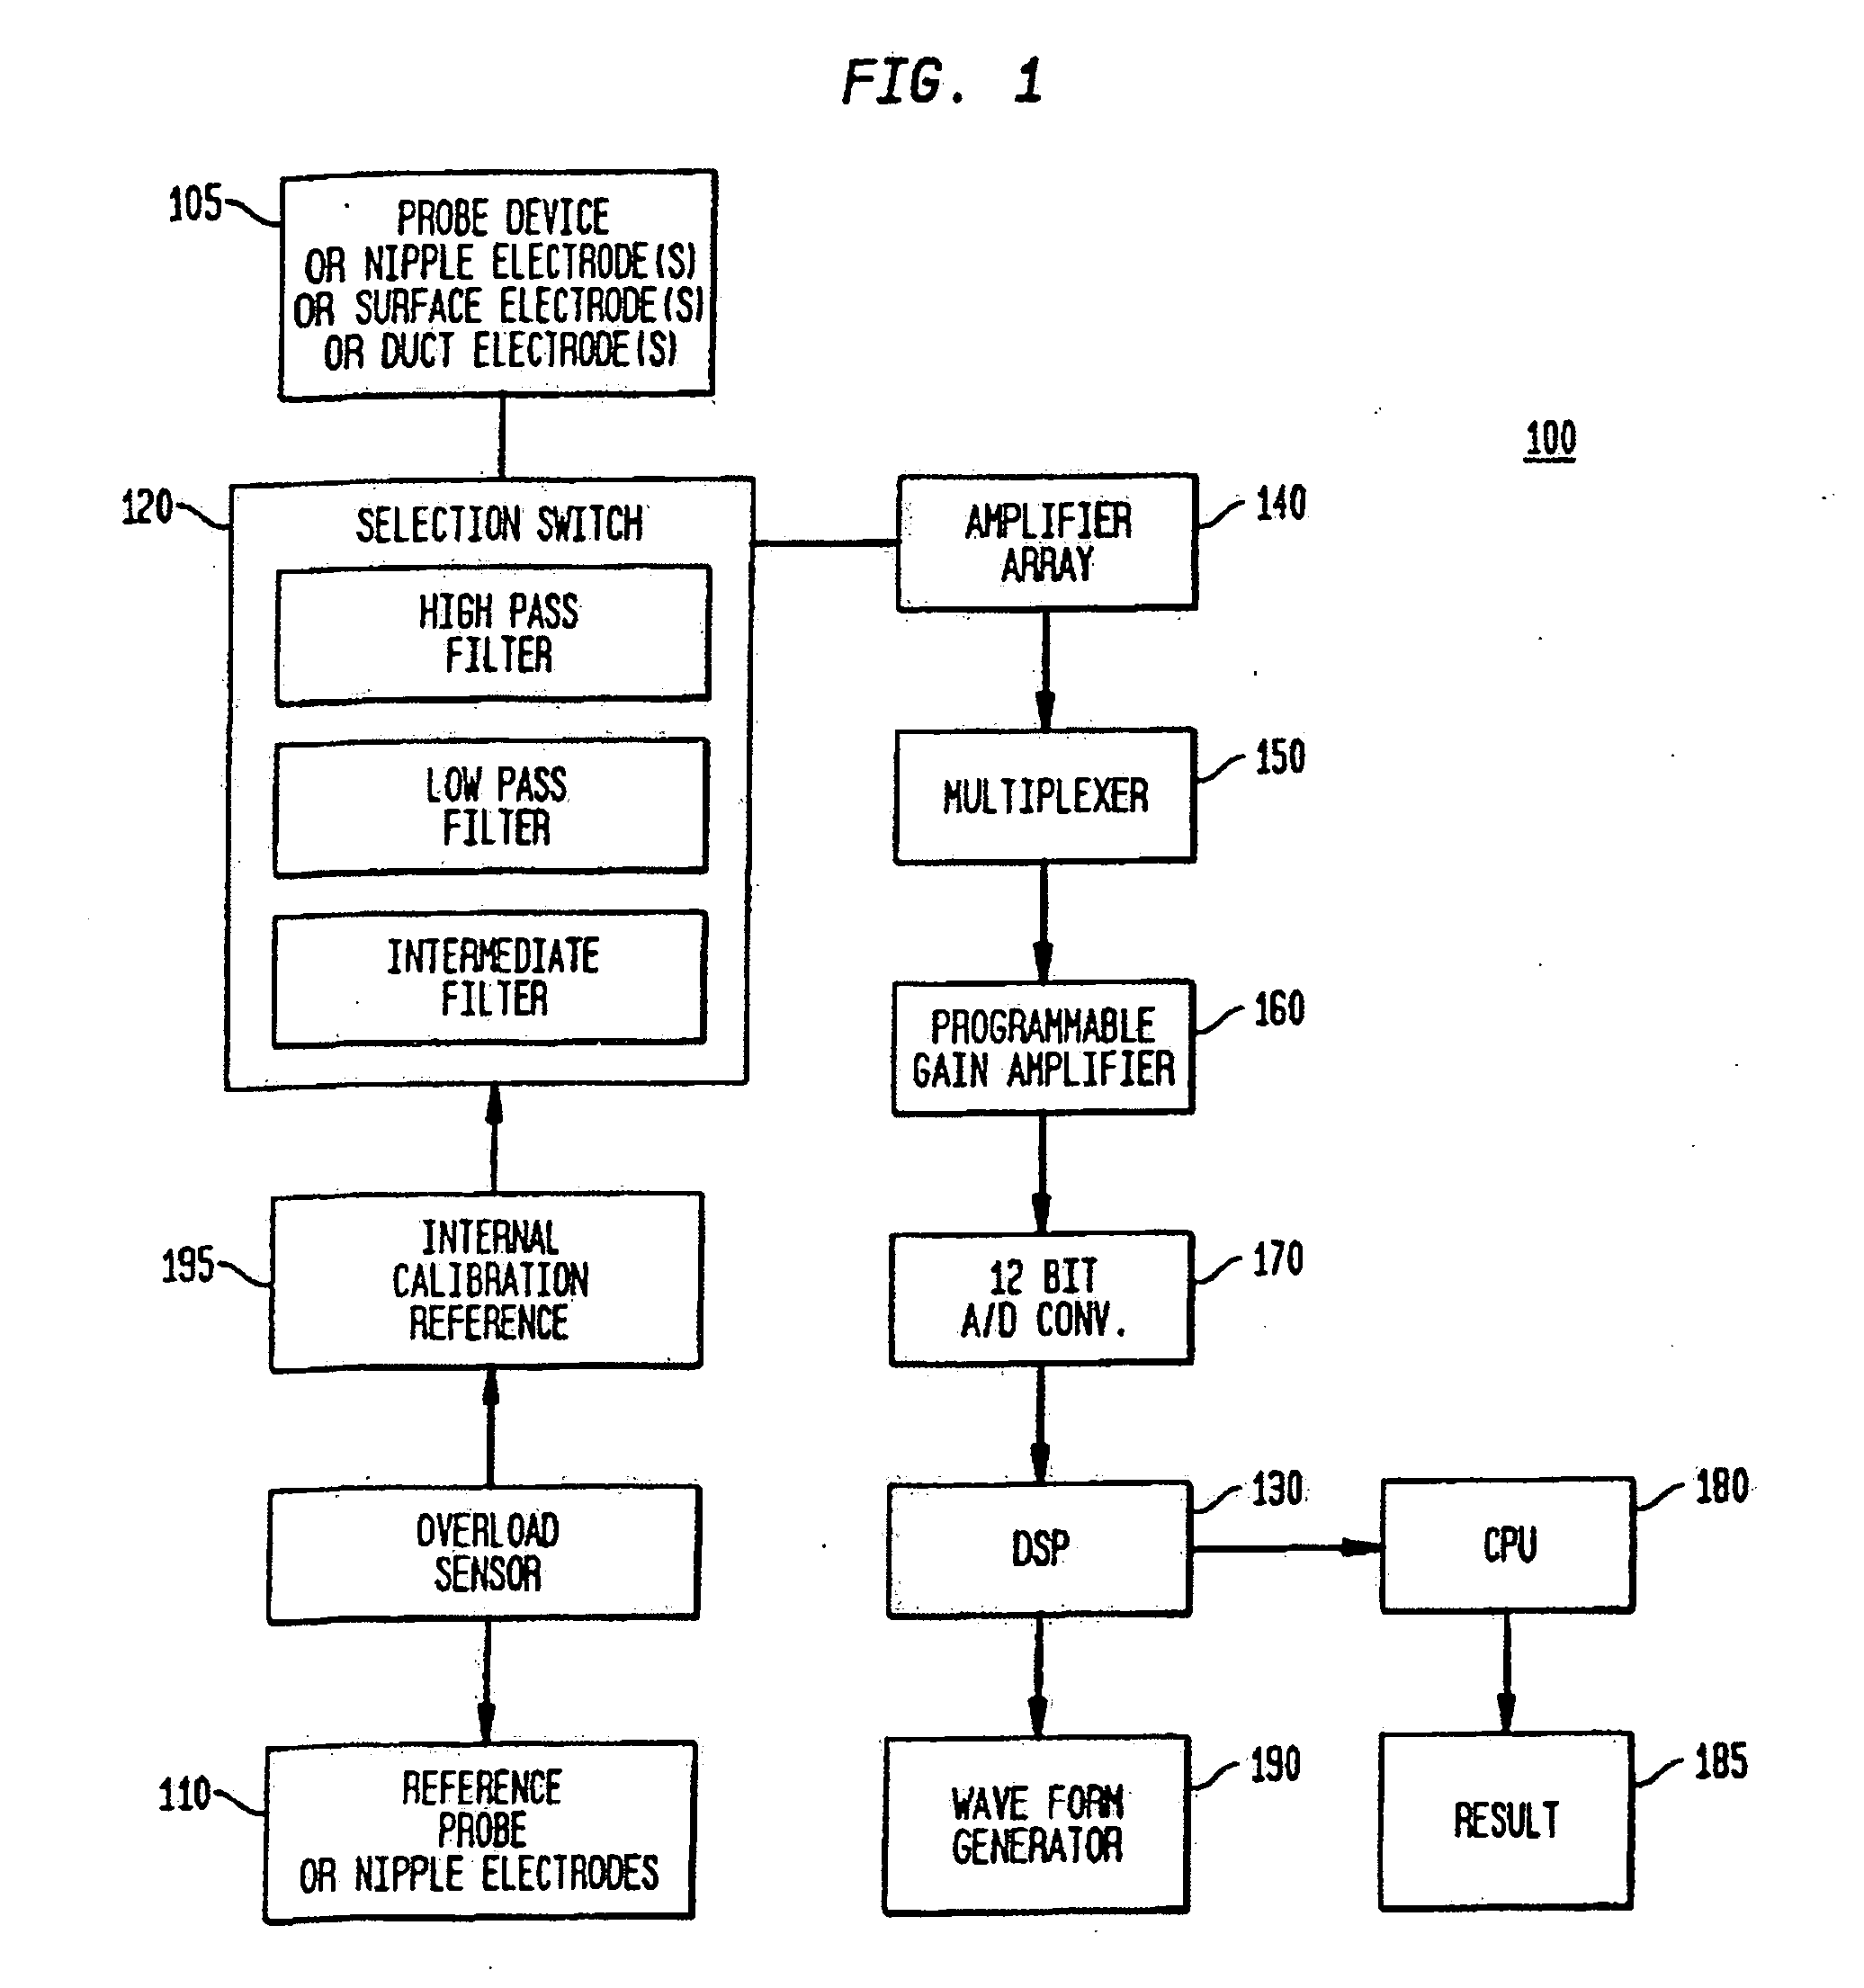 Method and system for detecting electrophysiological changes in pre-cancerous and cancerous tissue and epithelium